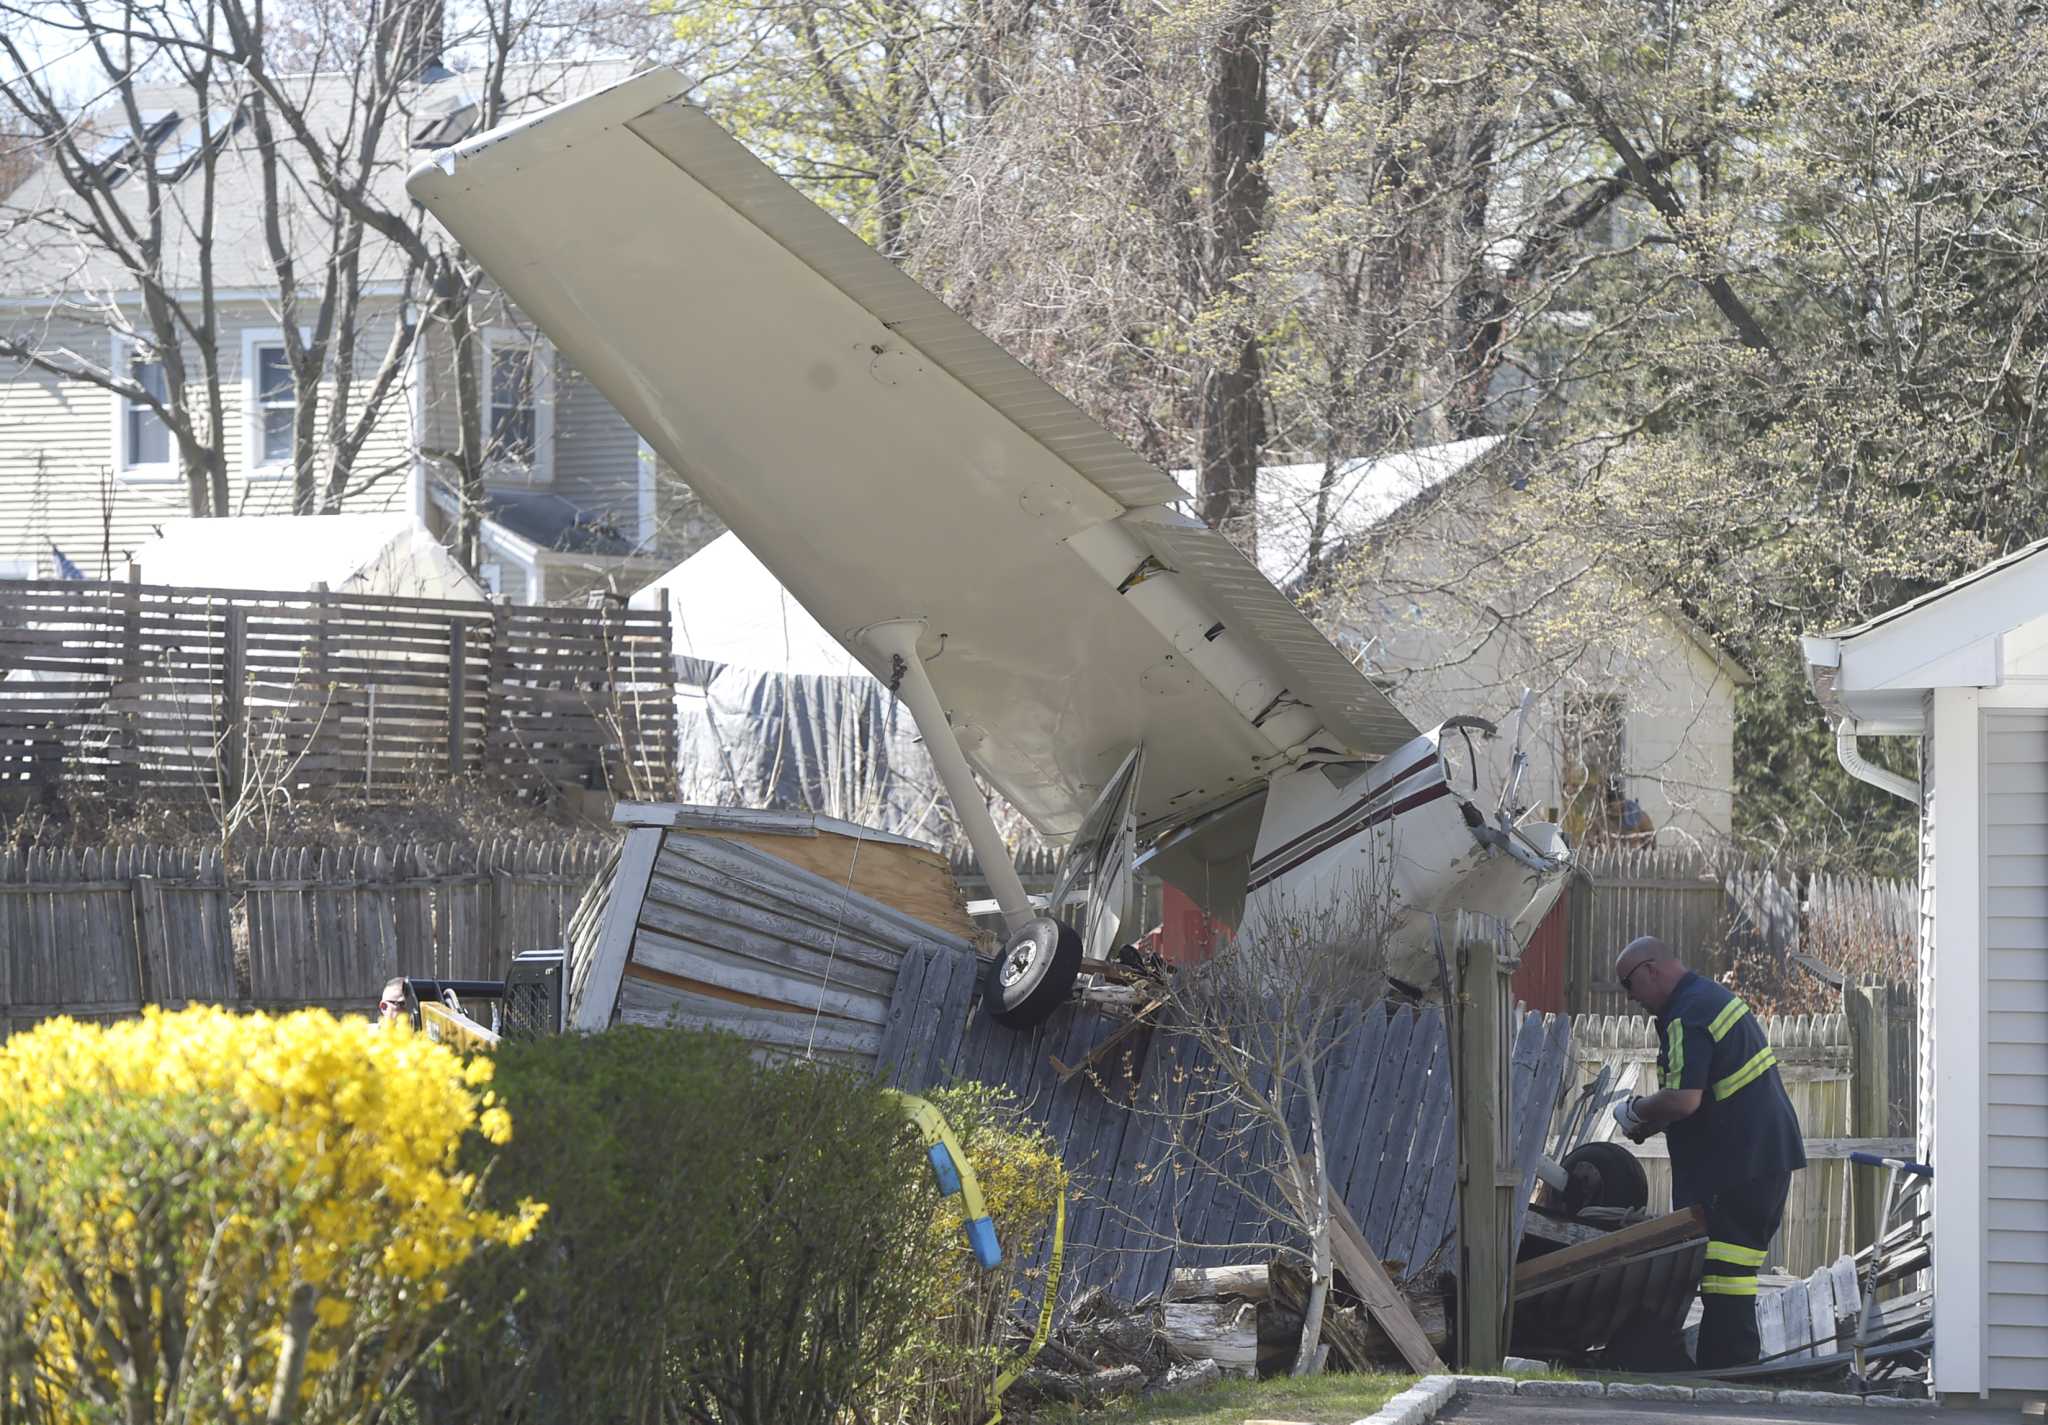 Plane that crashed into Danbury family's shed is sawed, removed